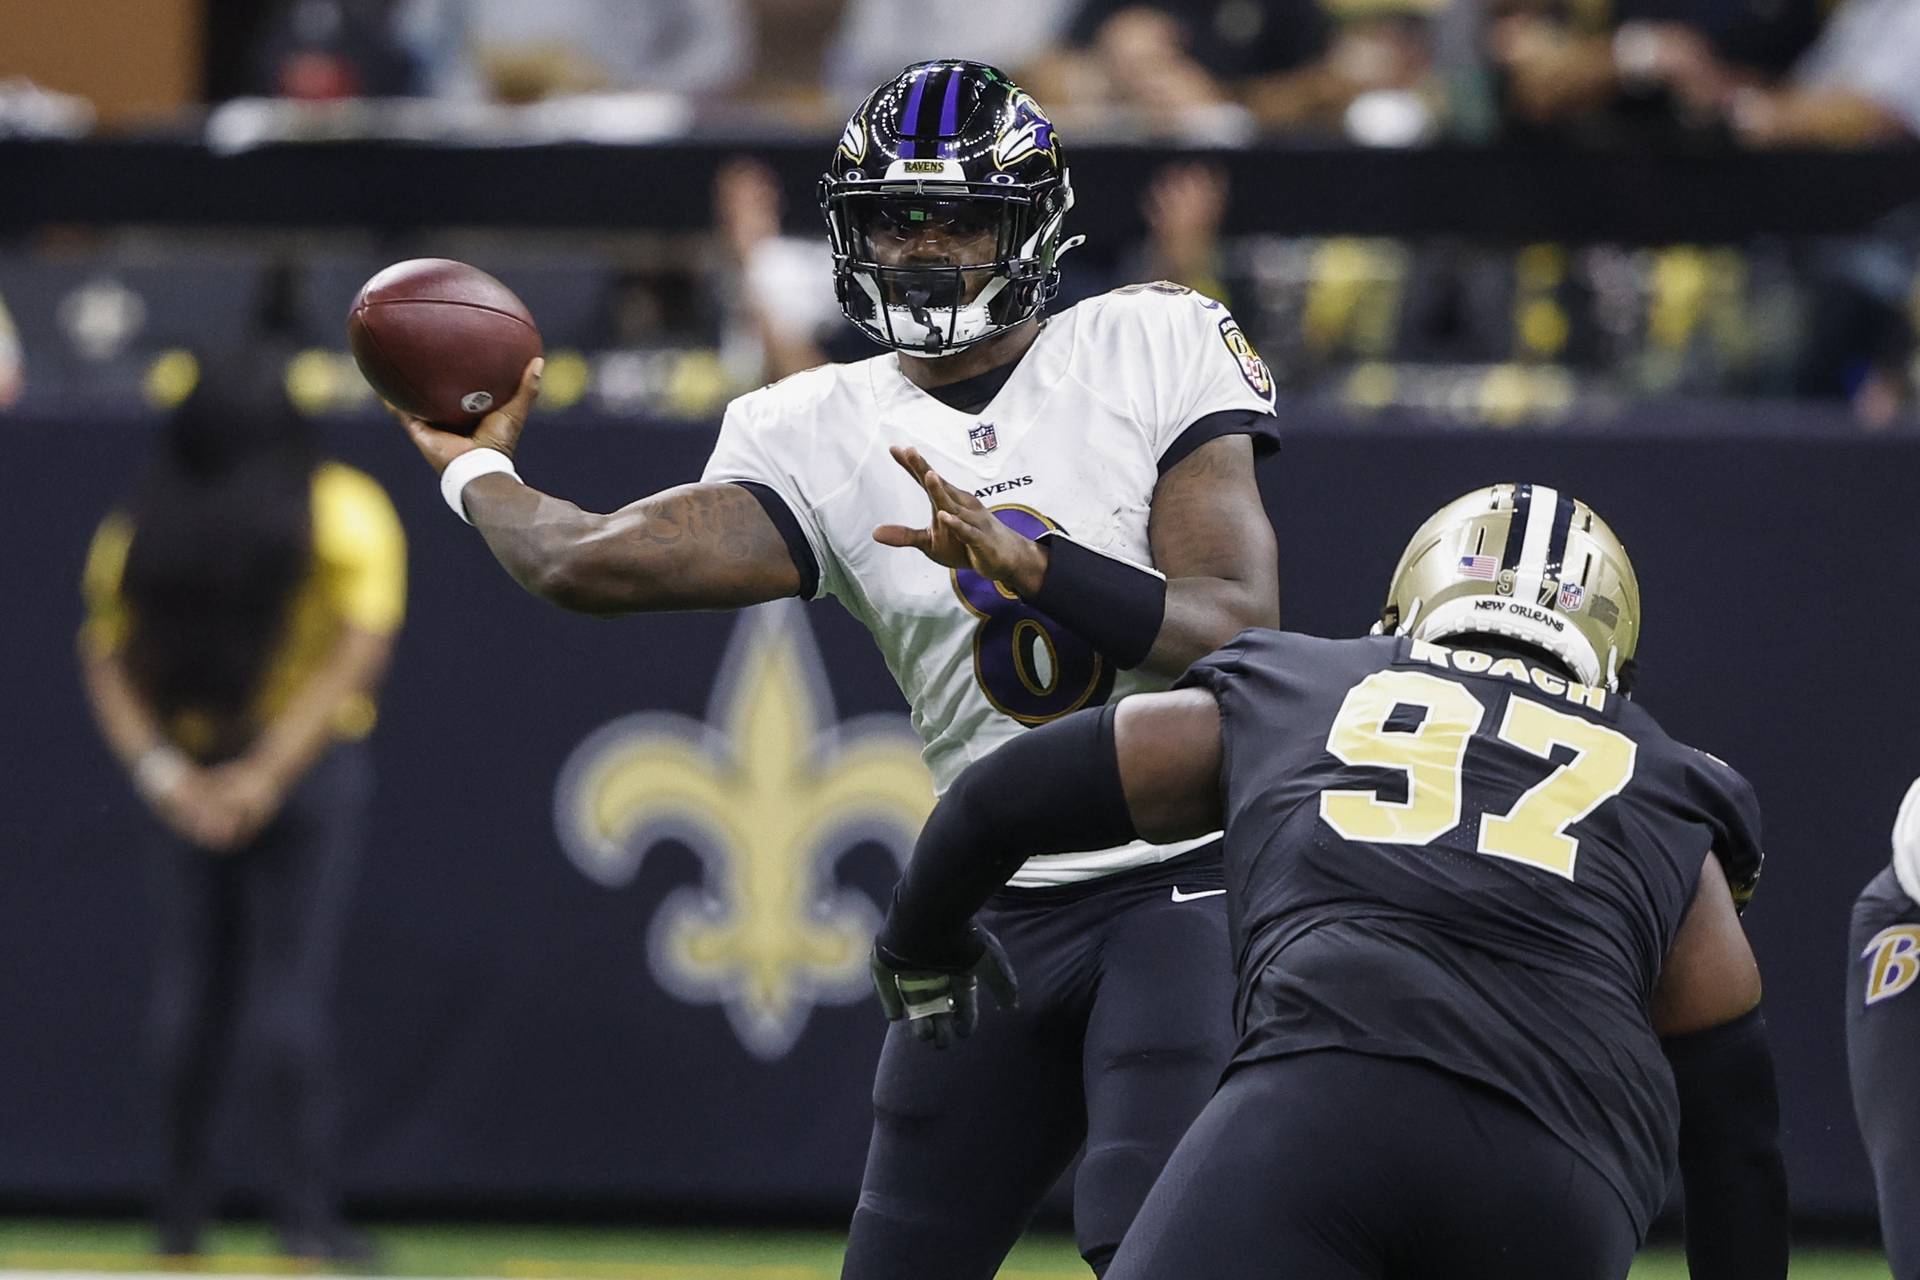 Baltimore Ravens quarterback Lamar Jackson (8) passes under pressure from New Orleans Saints defensive end Malcolm Roach (97) in the second half of an NFL football game in New Orleans, Monday, Nov. 7, 2022.